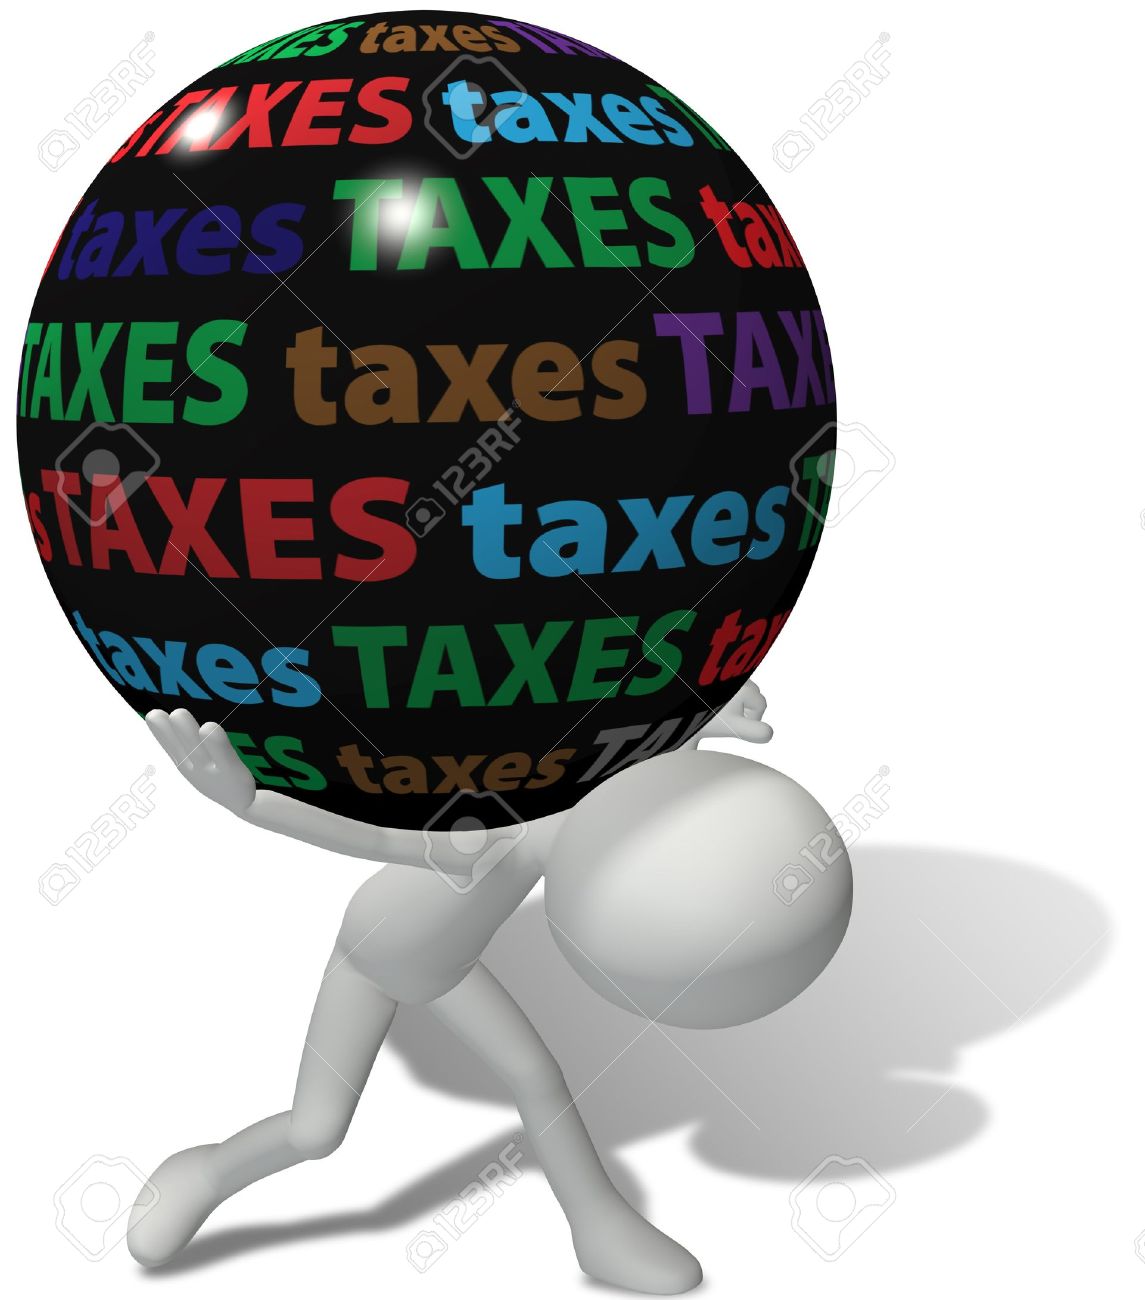 8002528-taxpayer-struggles-under-the-weight-of-a-large-unfair-burden-of-high-taxes